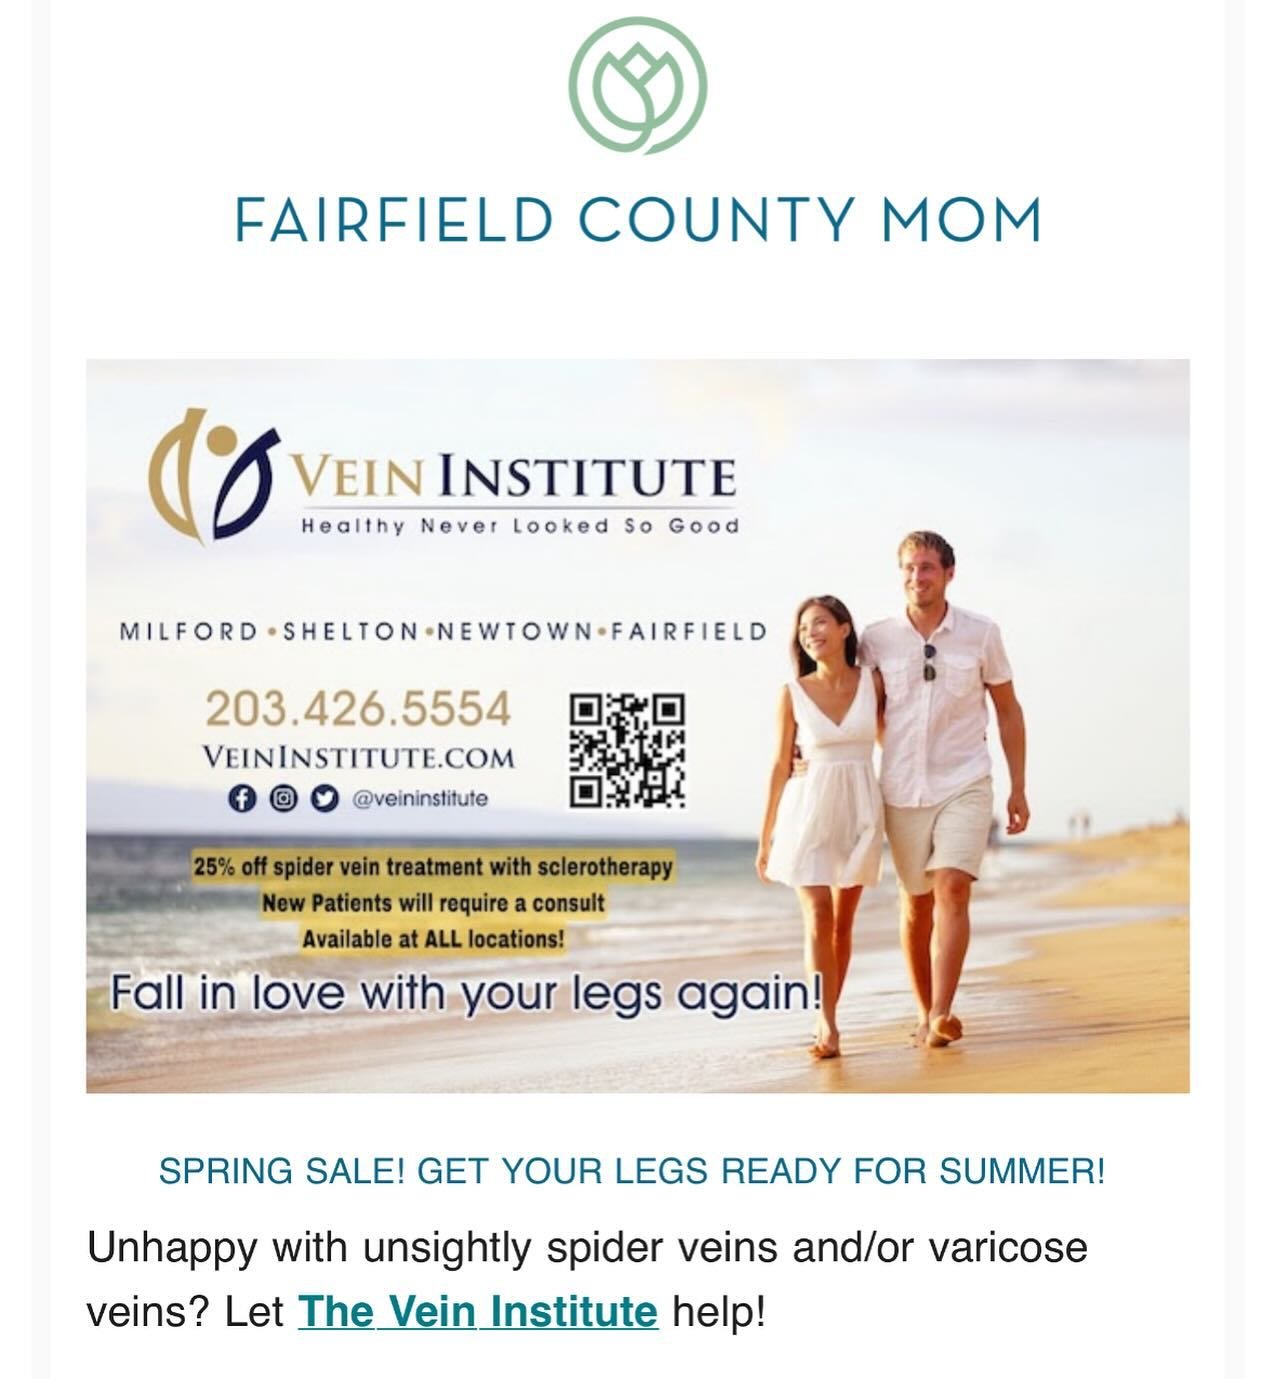 We were thrilled to be featured in Fairfield County Mom&rsquo;s newsletter last Friday!✨

As a thank you for the feature, we&rsquo;d like to offer 25% off spider vein treatment with sclerotherapy! (If not an existing patient, a consult is needed)

He